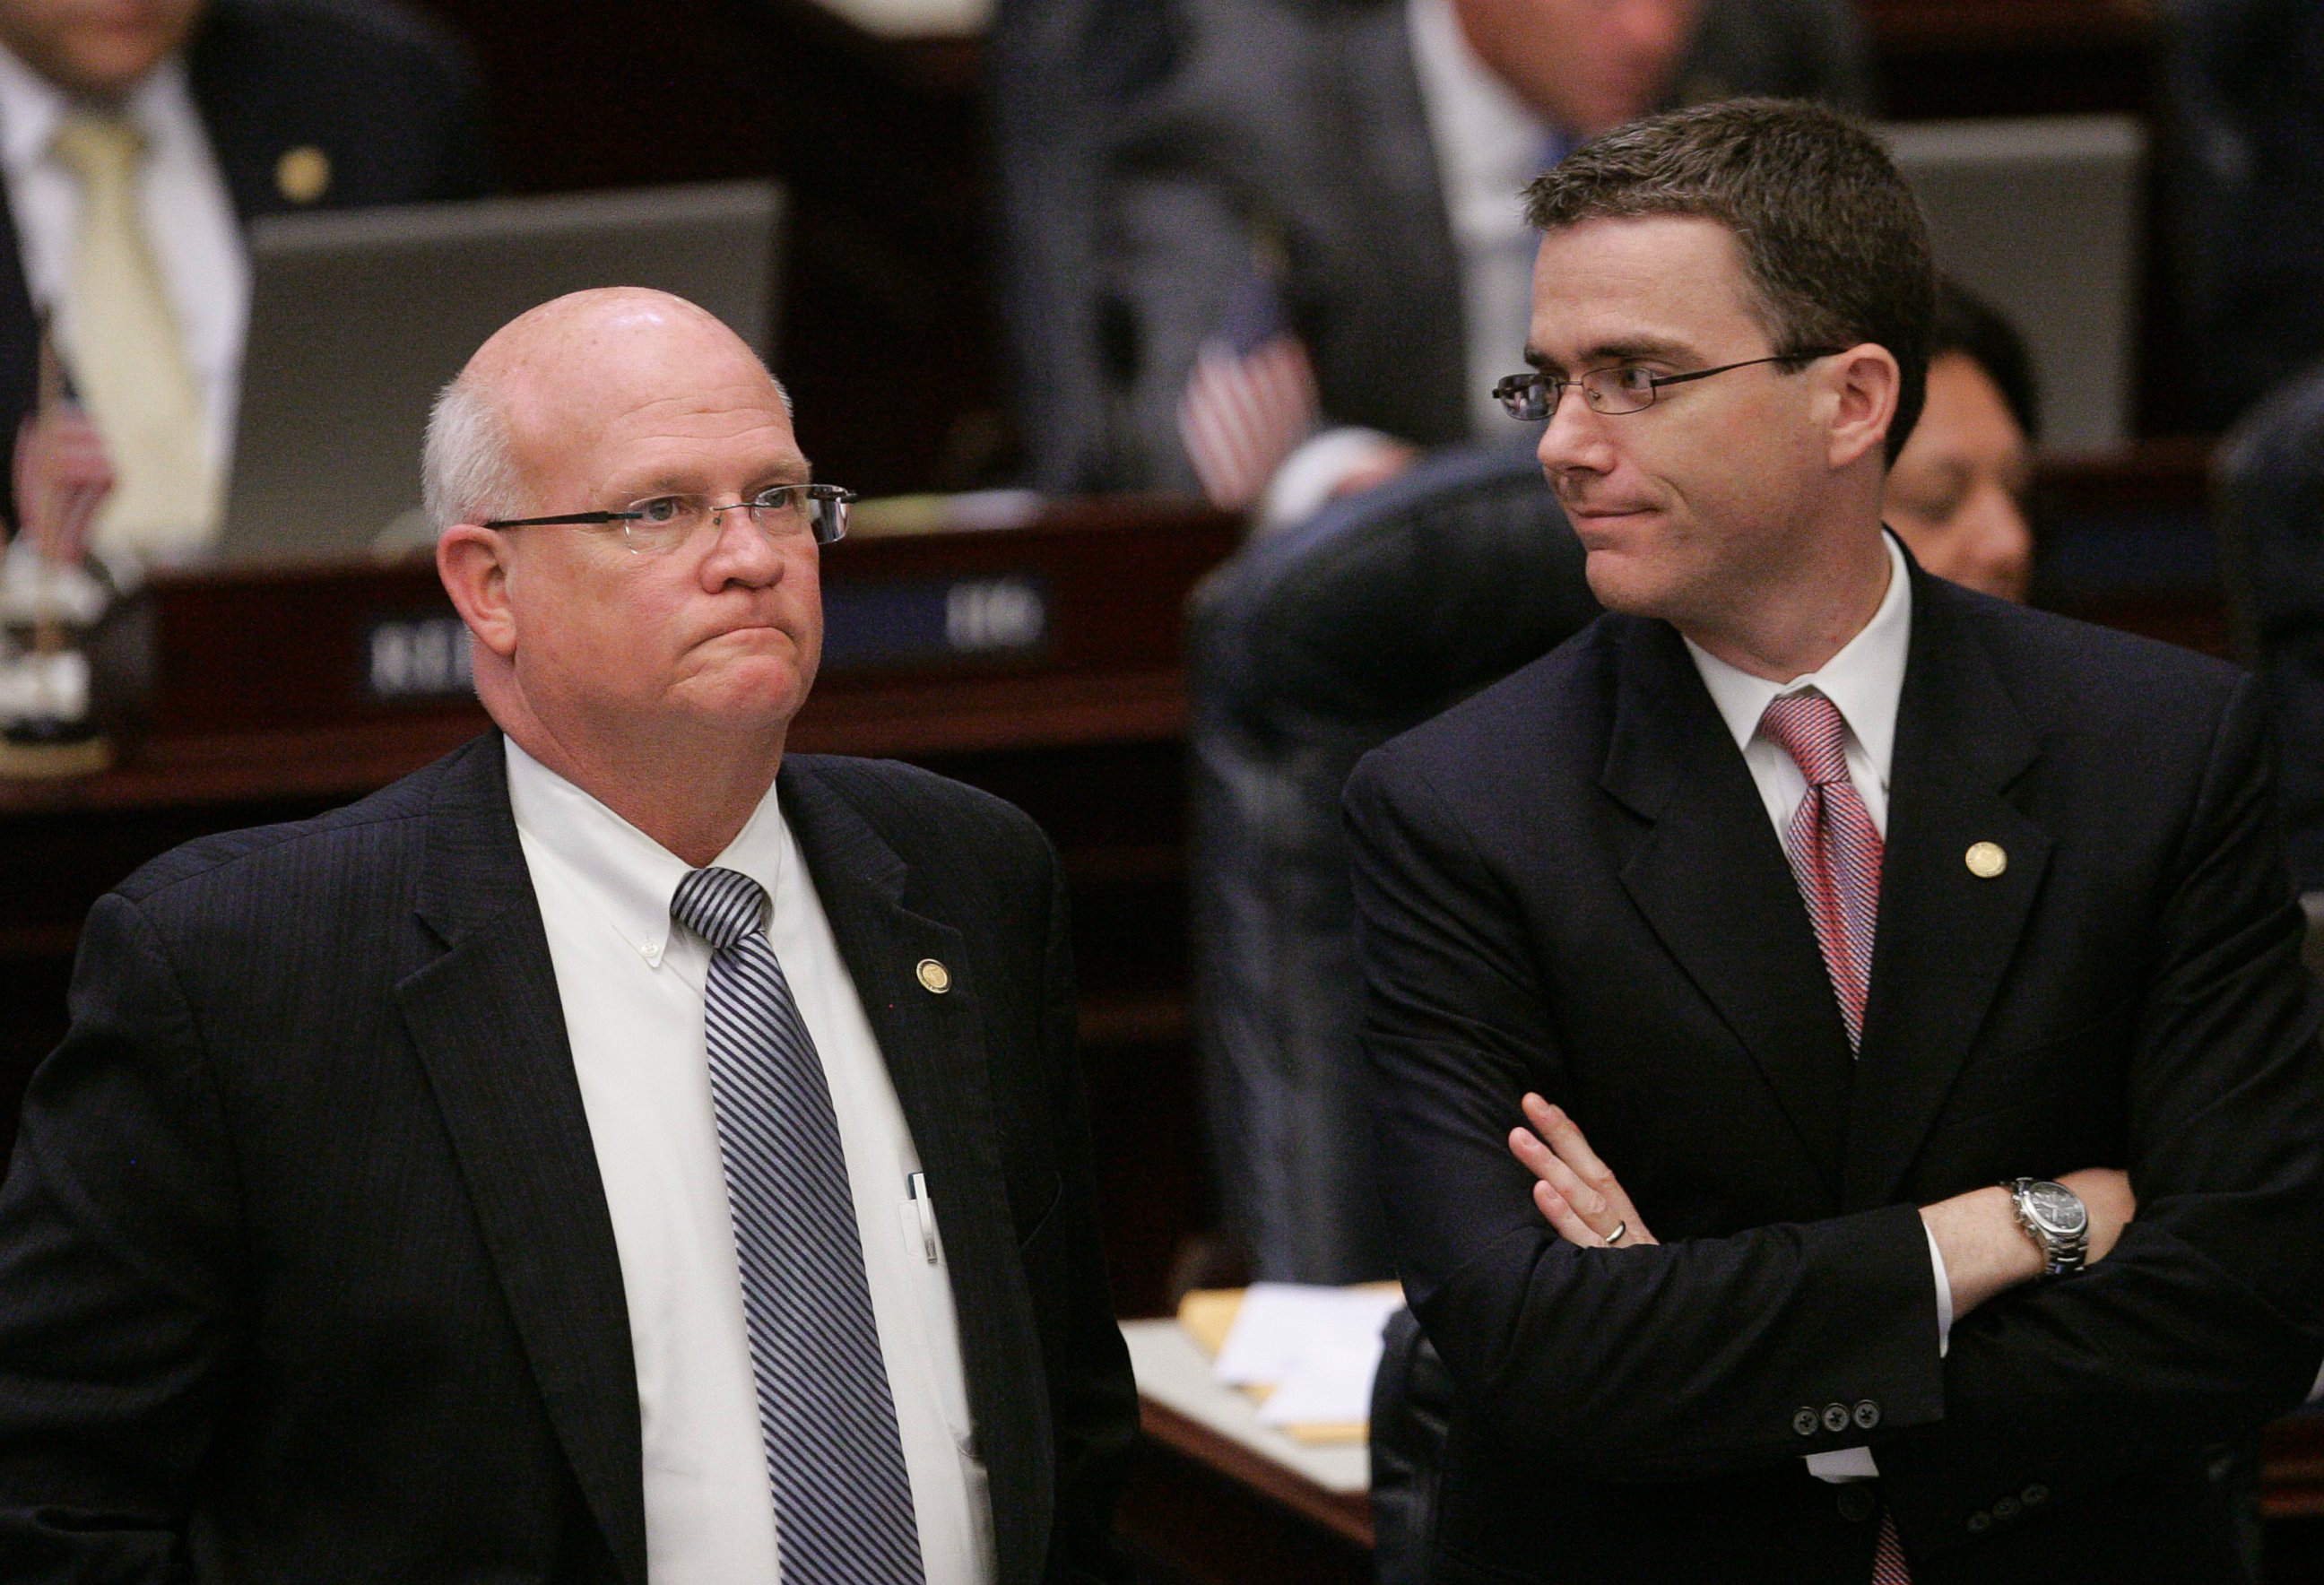 PHOTO: Rep. Dennis Baxley checks the vote on a bill during session on May 4, 2011 in Tallahassee, Fla.